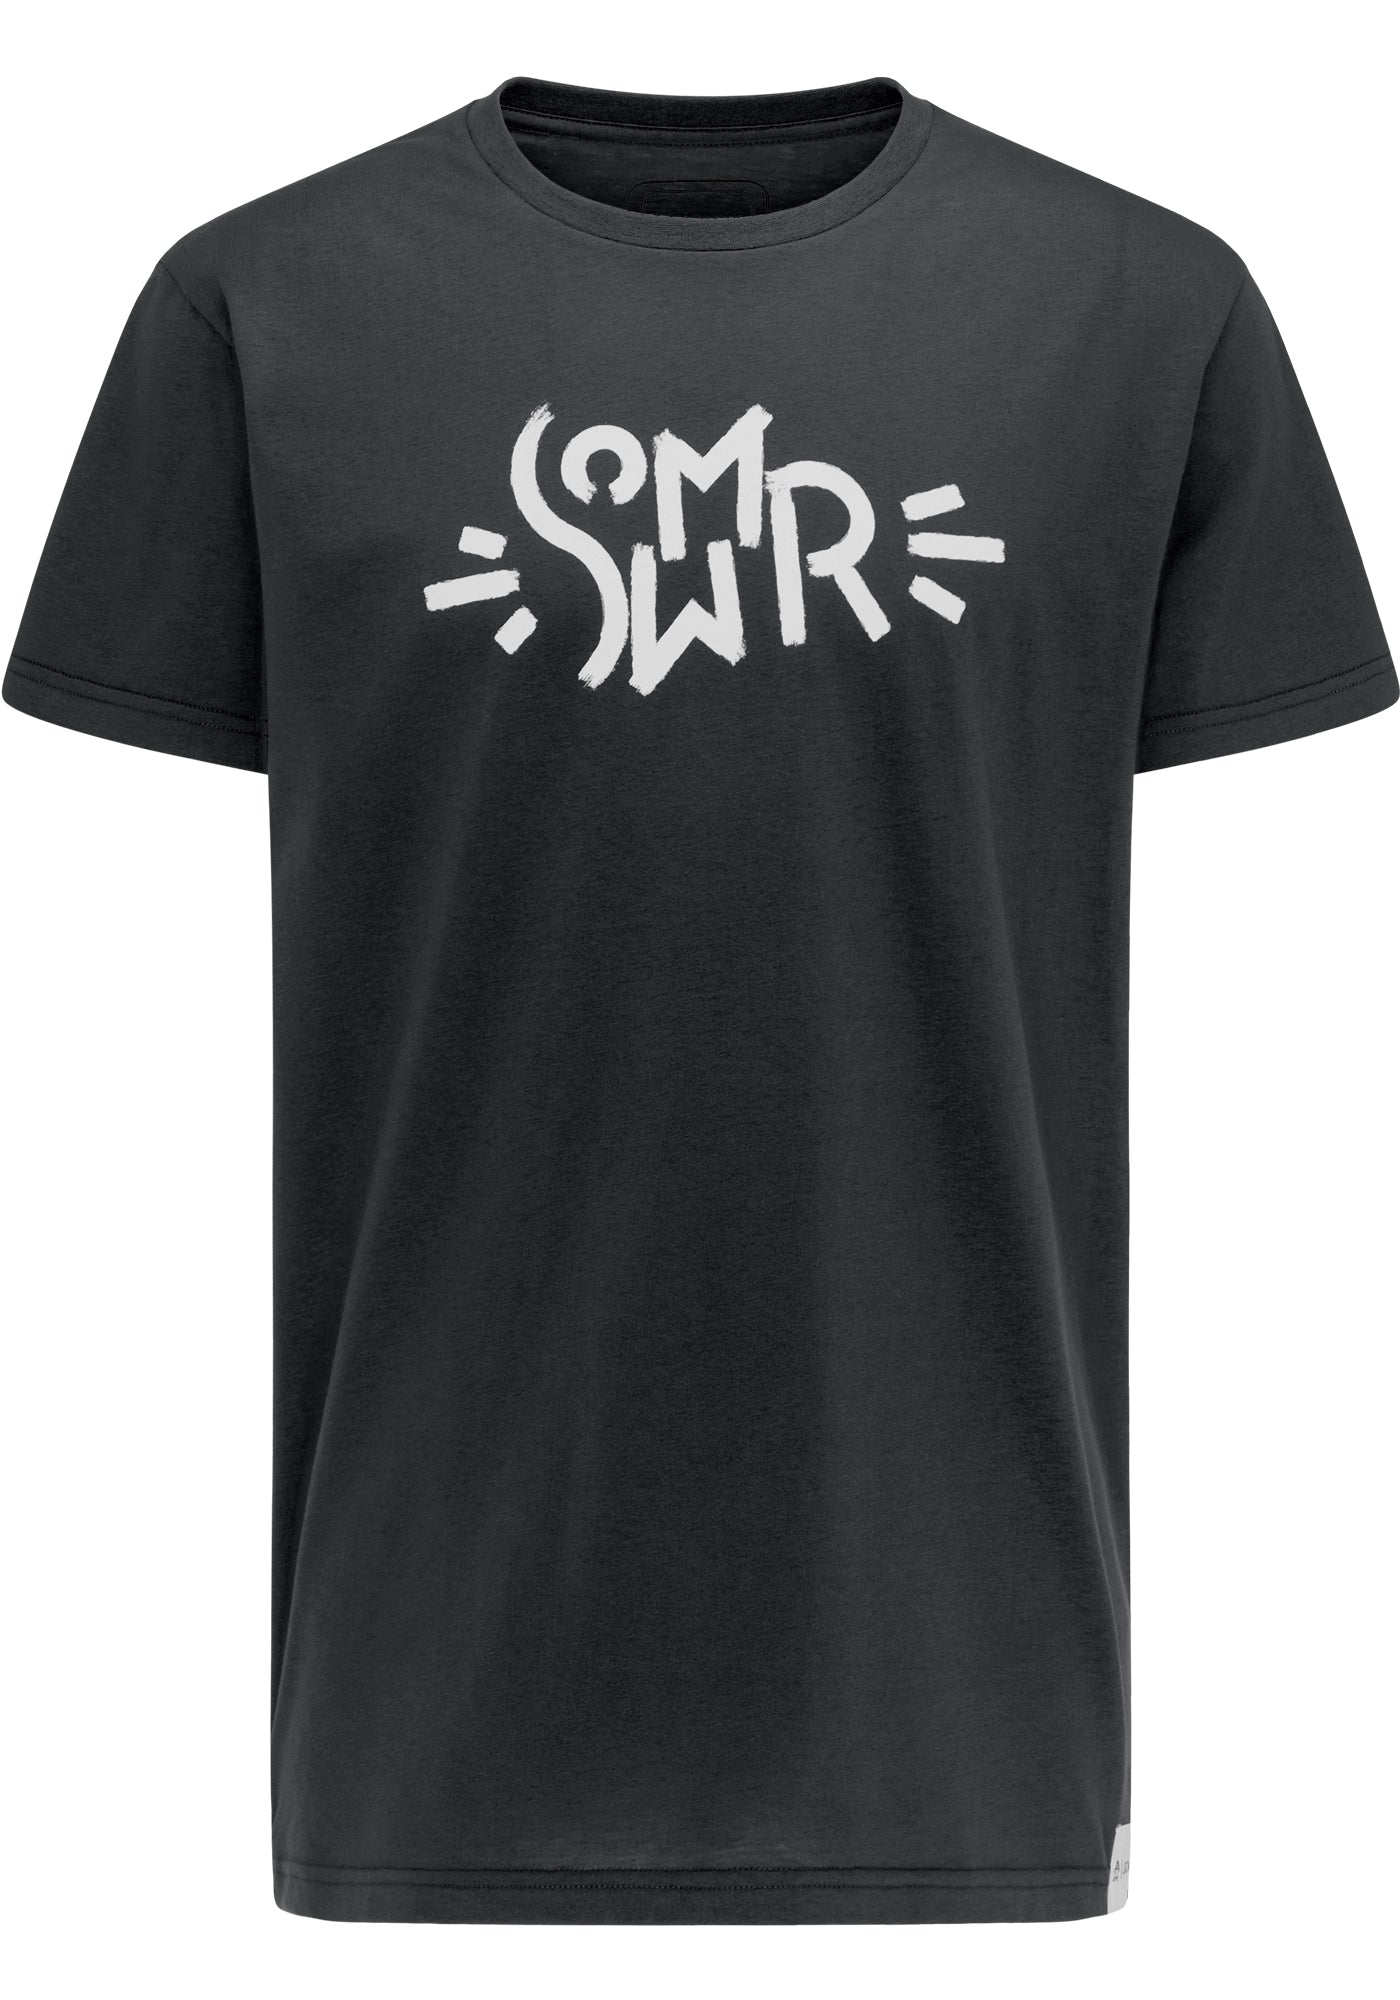 SOMWR SMILEY TEE T-Shirt BLK000